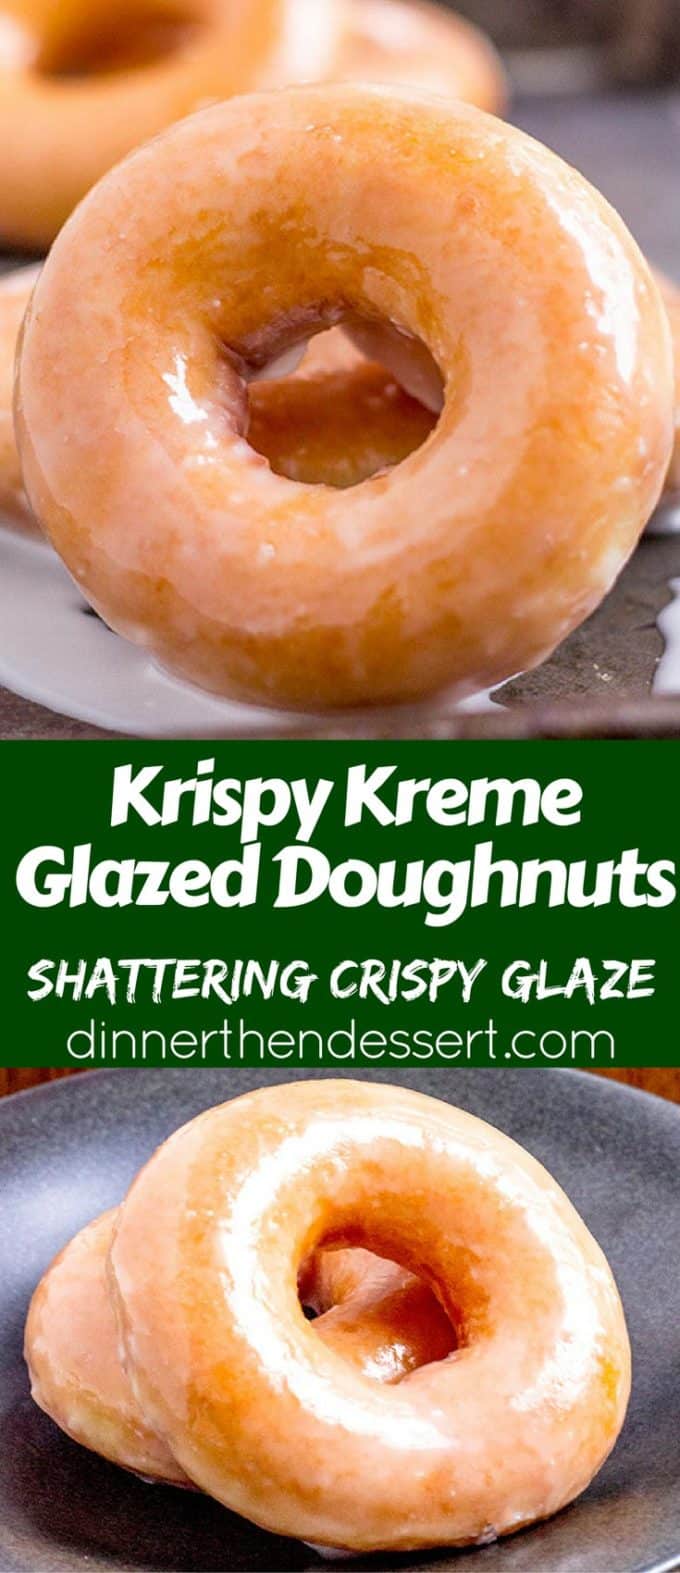 Krispy Kreme Glazed Doughnuts you know and love and now you can make them at home and eat them fresh without braving the lines or drive-thru.